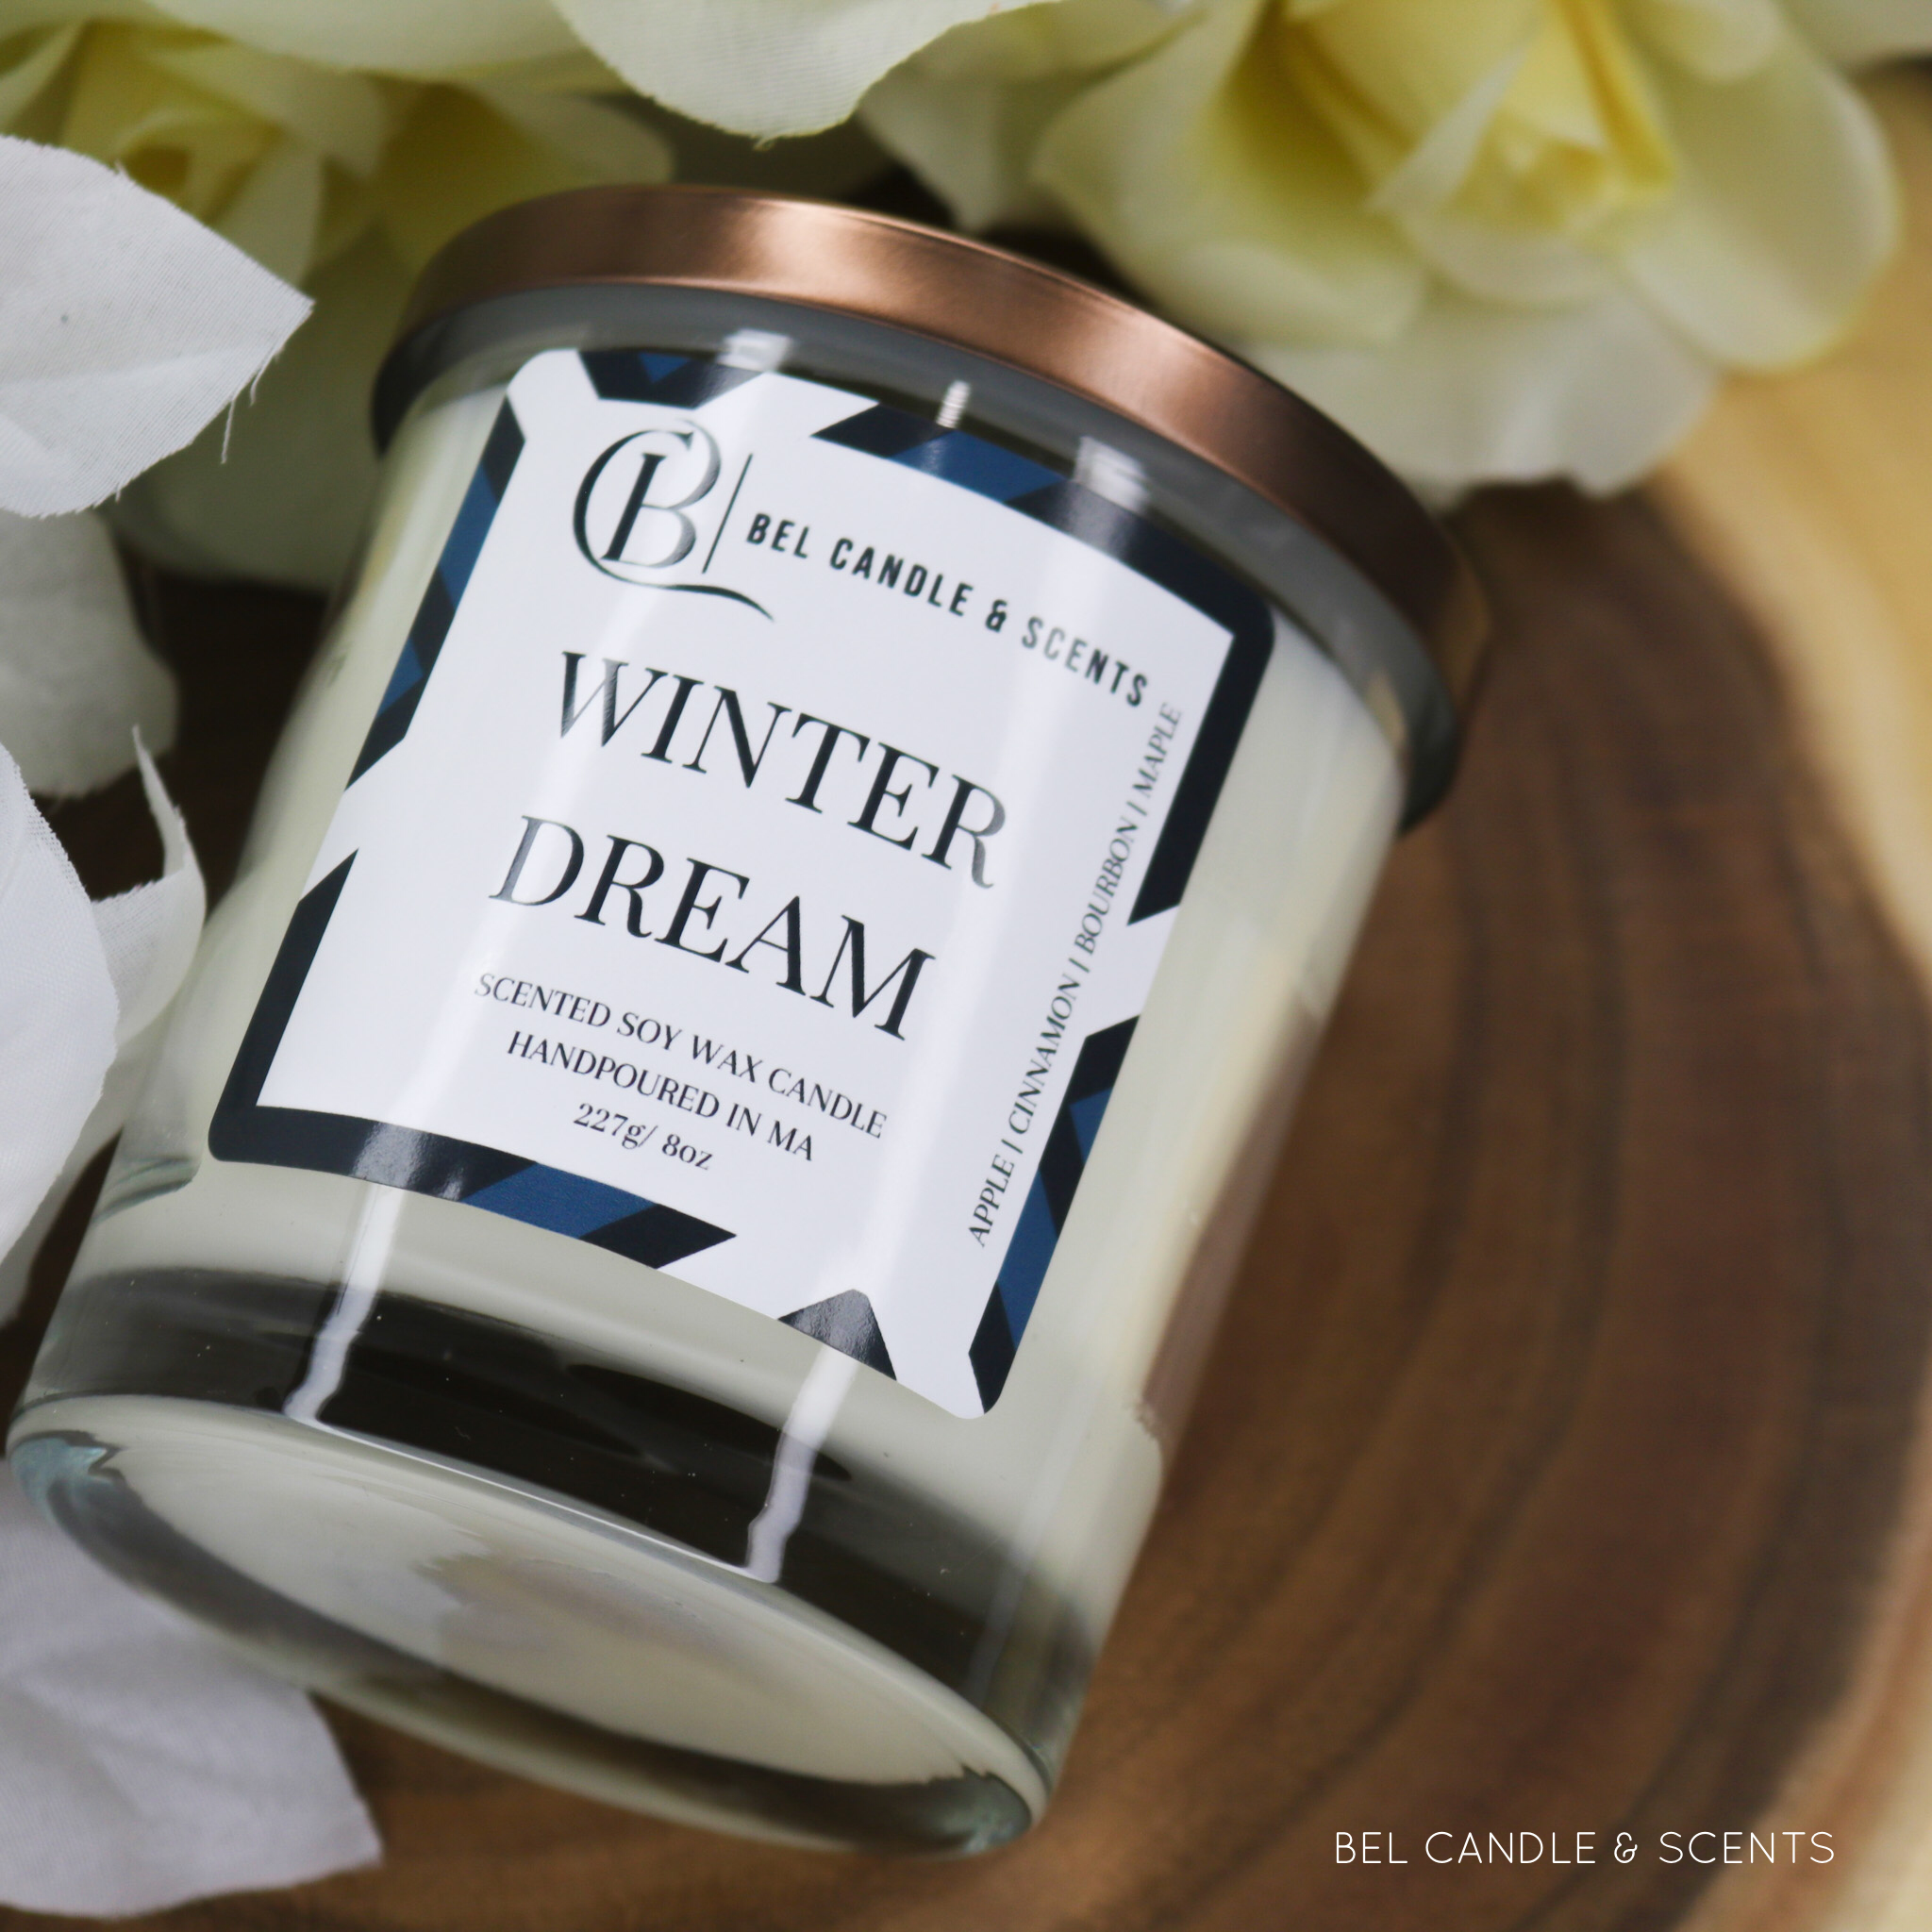 HANDMADE SOY/COCONUT SCENTED CANDLE  WINTER DREAM I BEL CANDLE & SCENTS –  Bel Candle & Scents